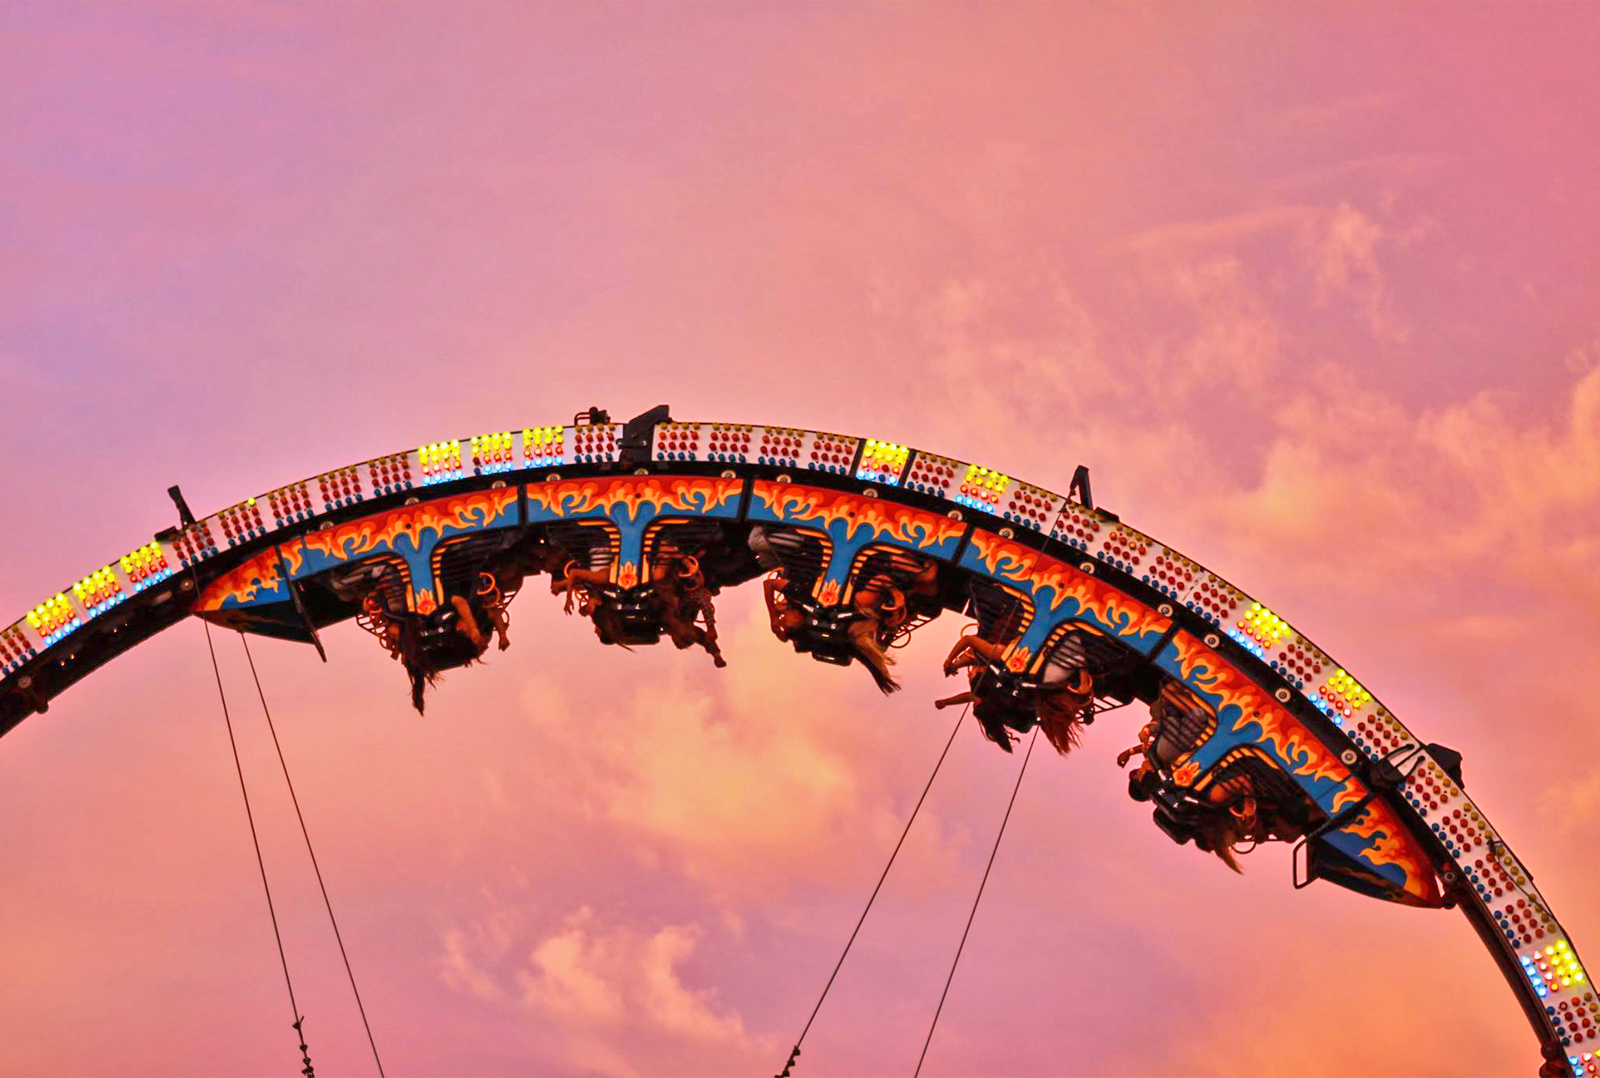 Stanislaus County Fair Join us on July 1019, 2020